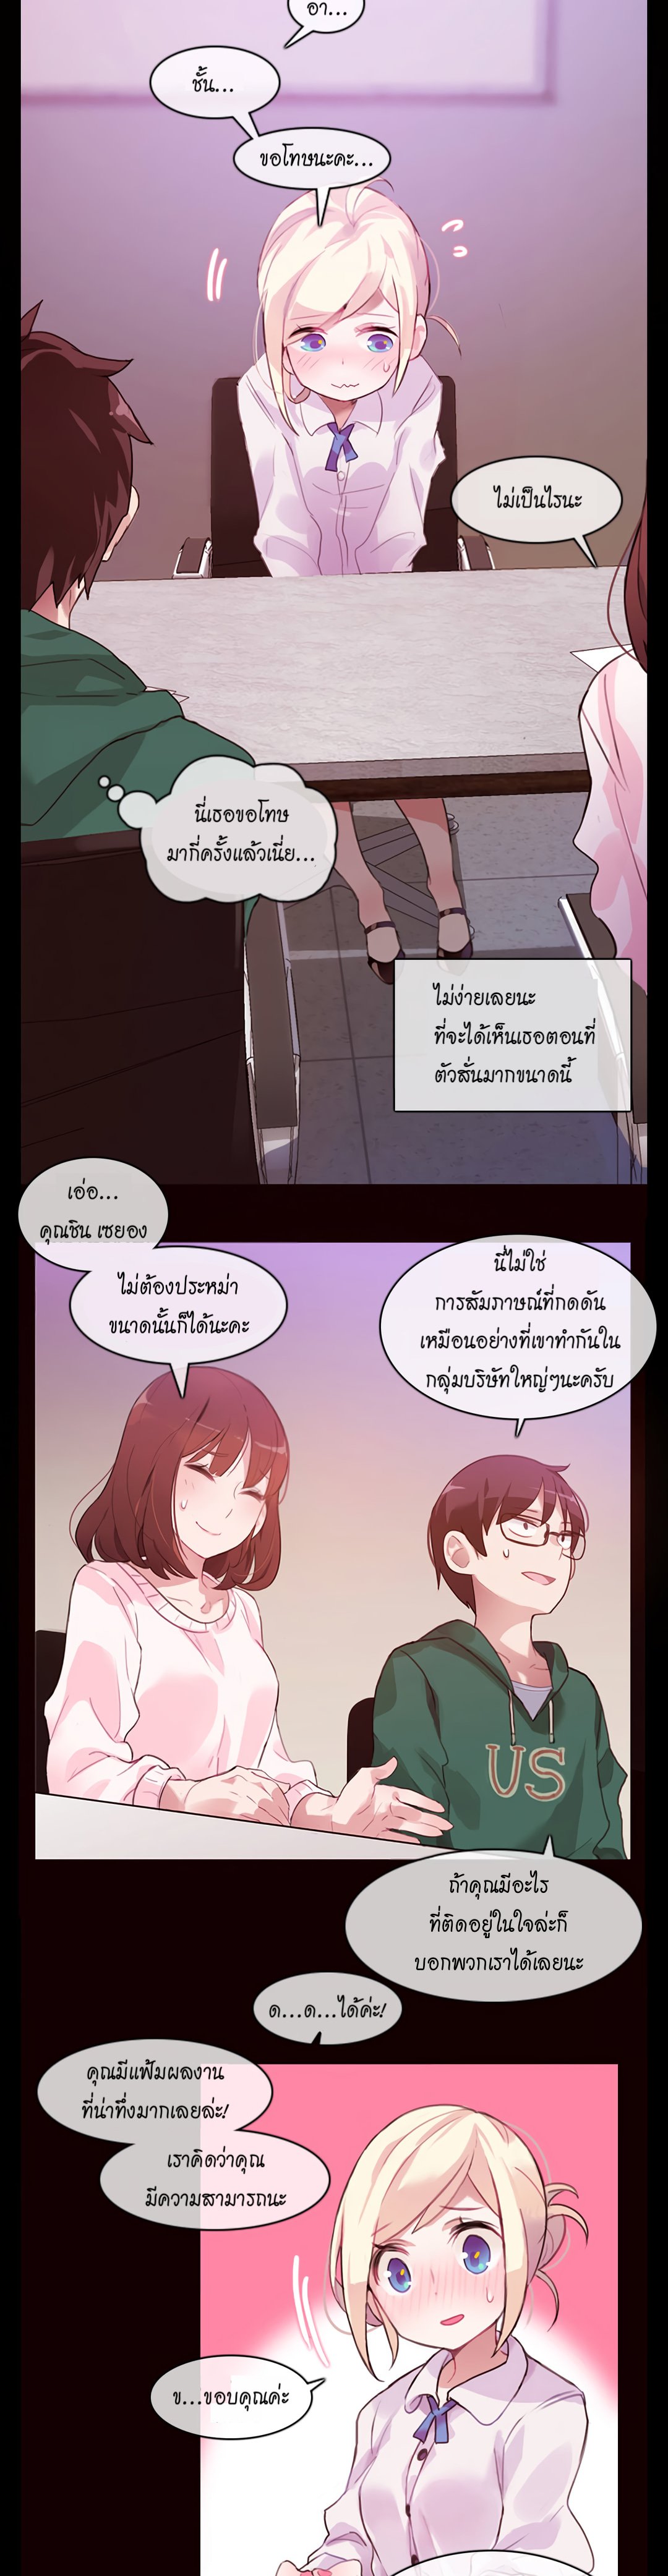 A Pervert’s Daily Life 1 (10)